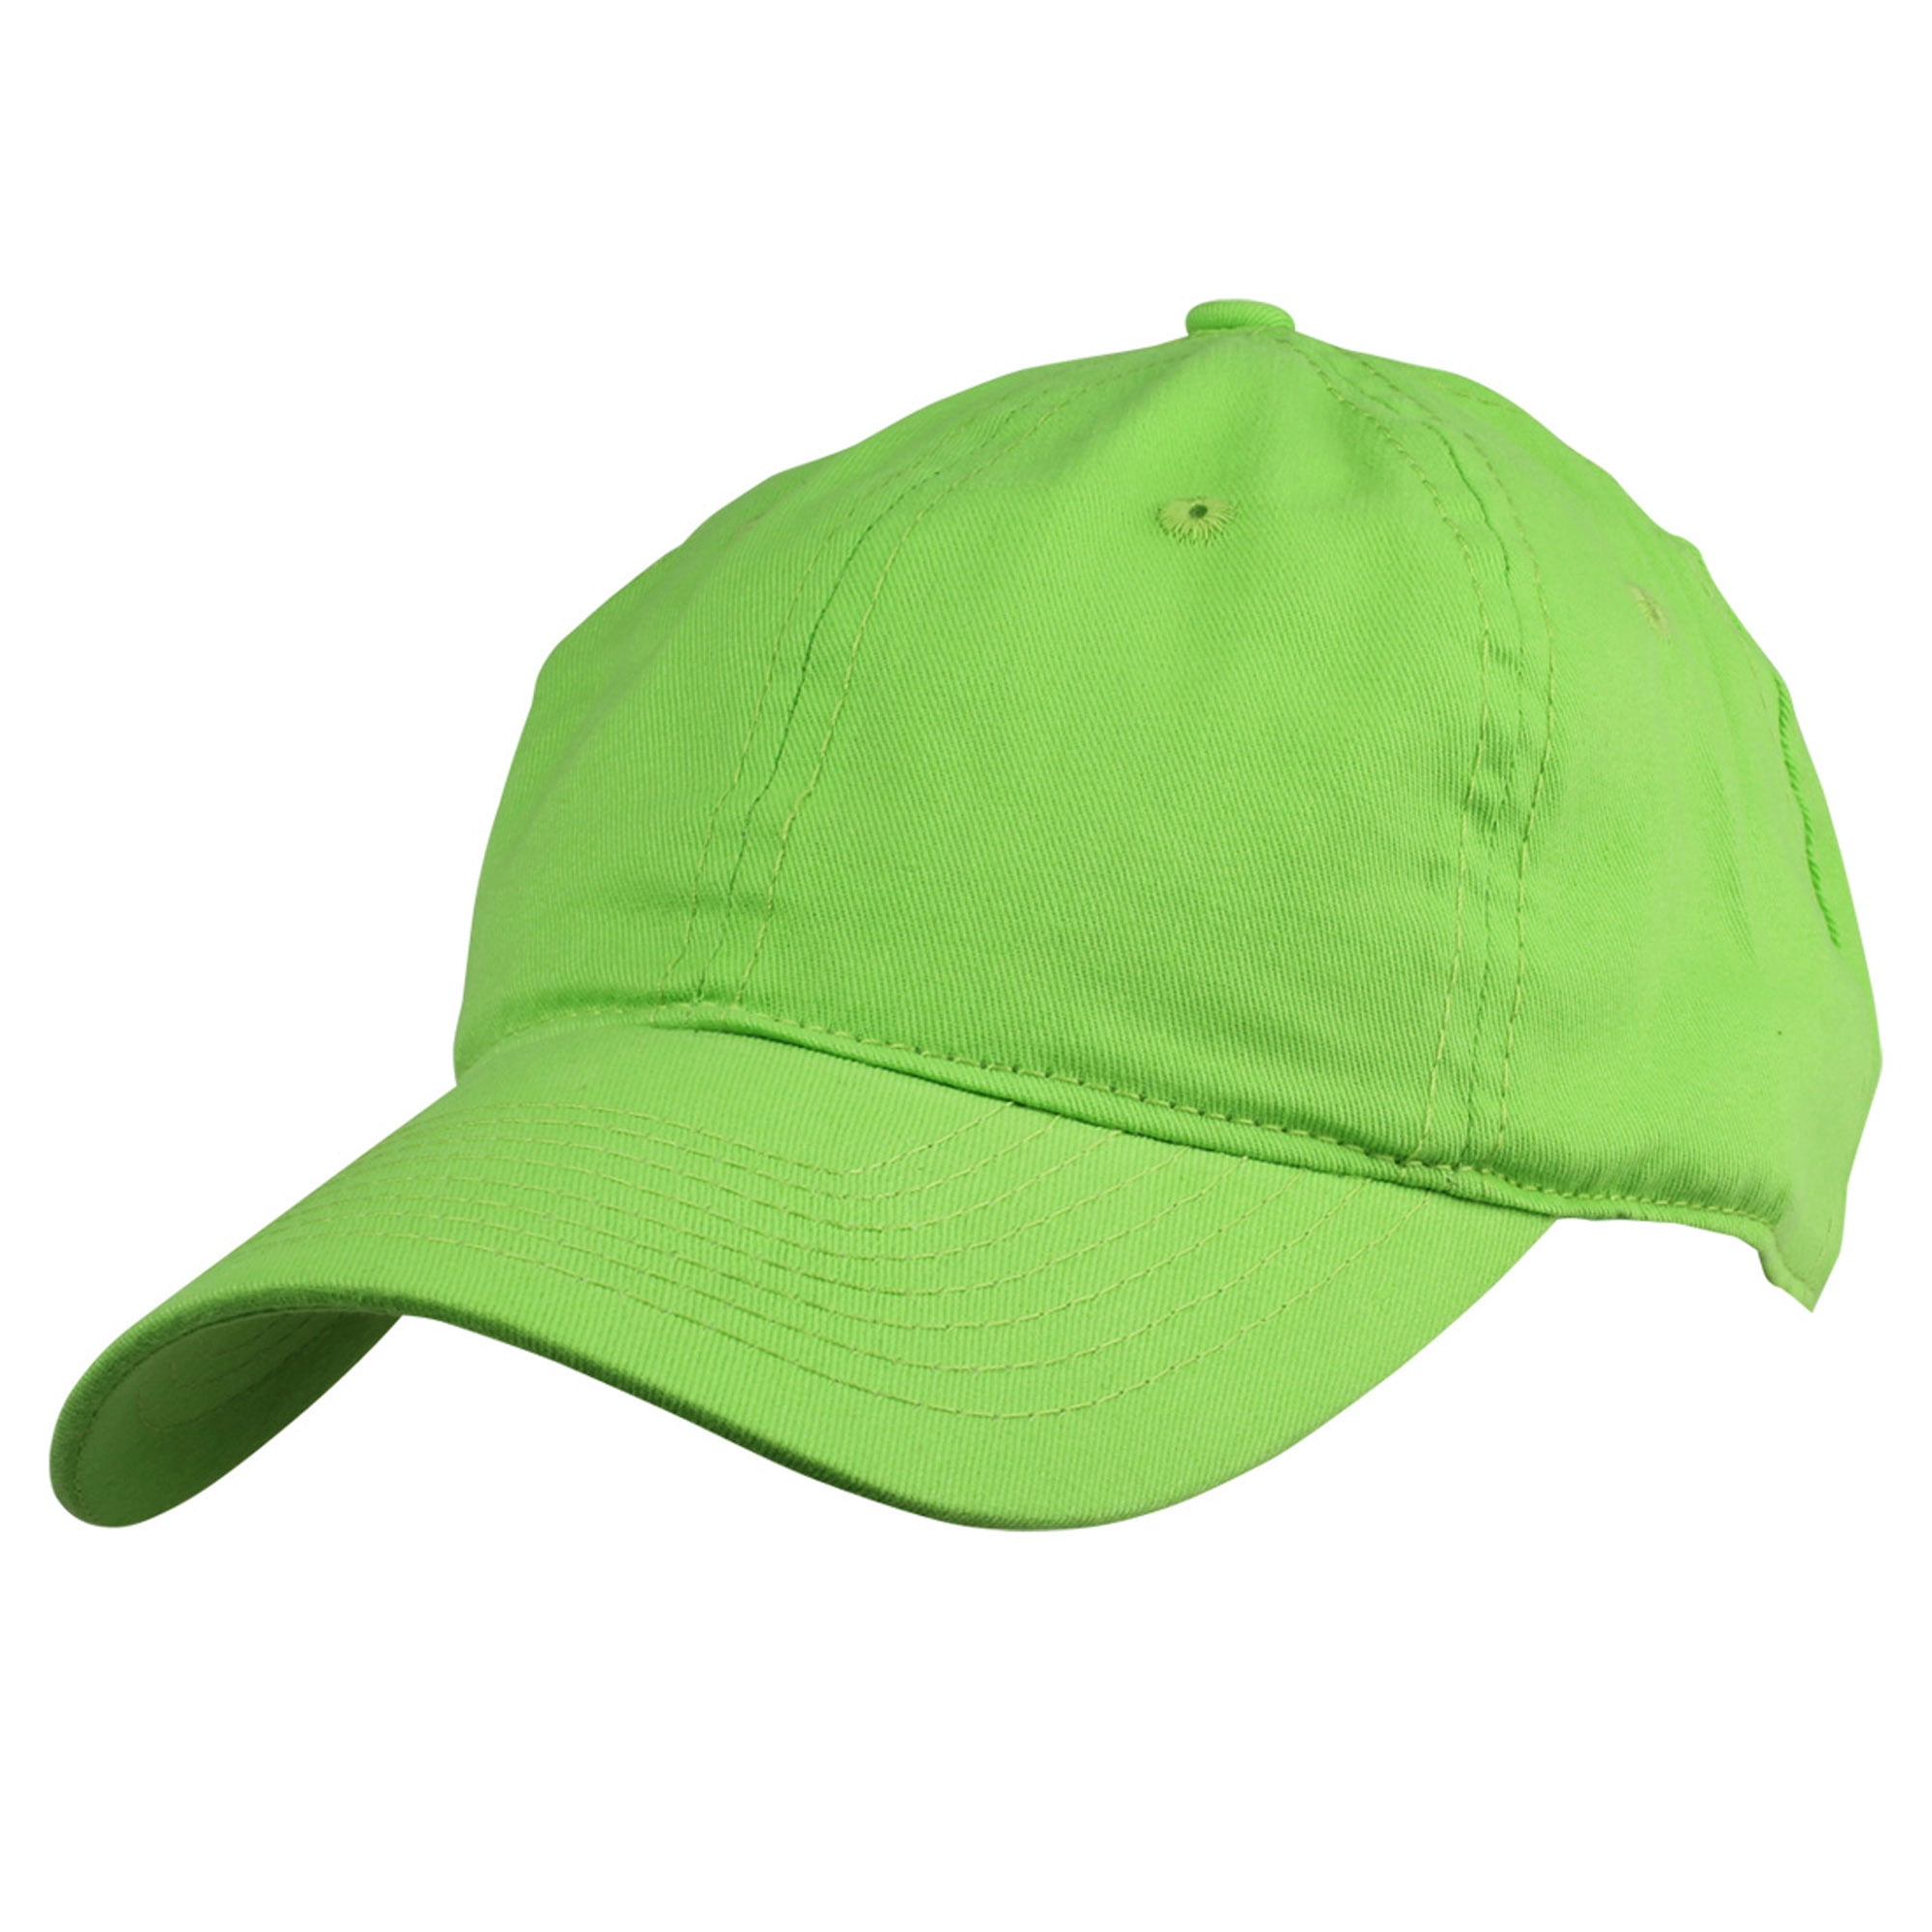 DALIX Womens Pastel Lovers Cap - Adjustable Hat with Velcro Closure in Lime Green